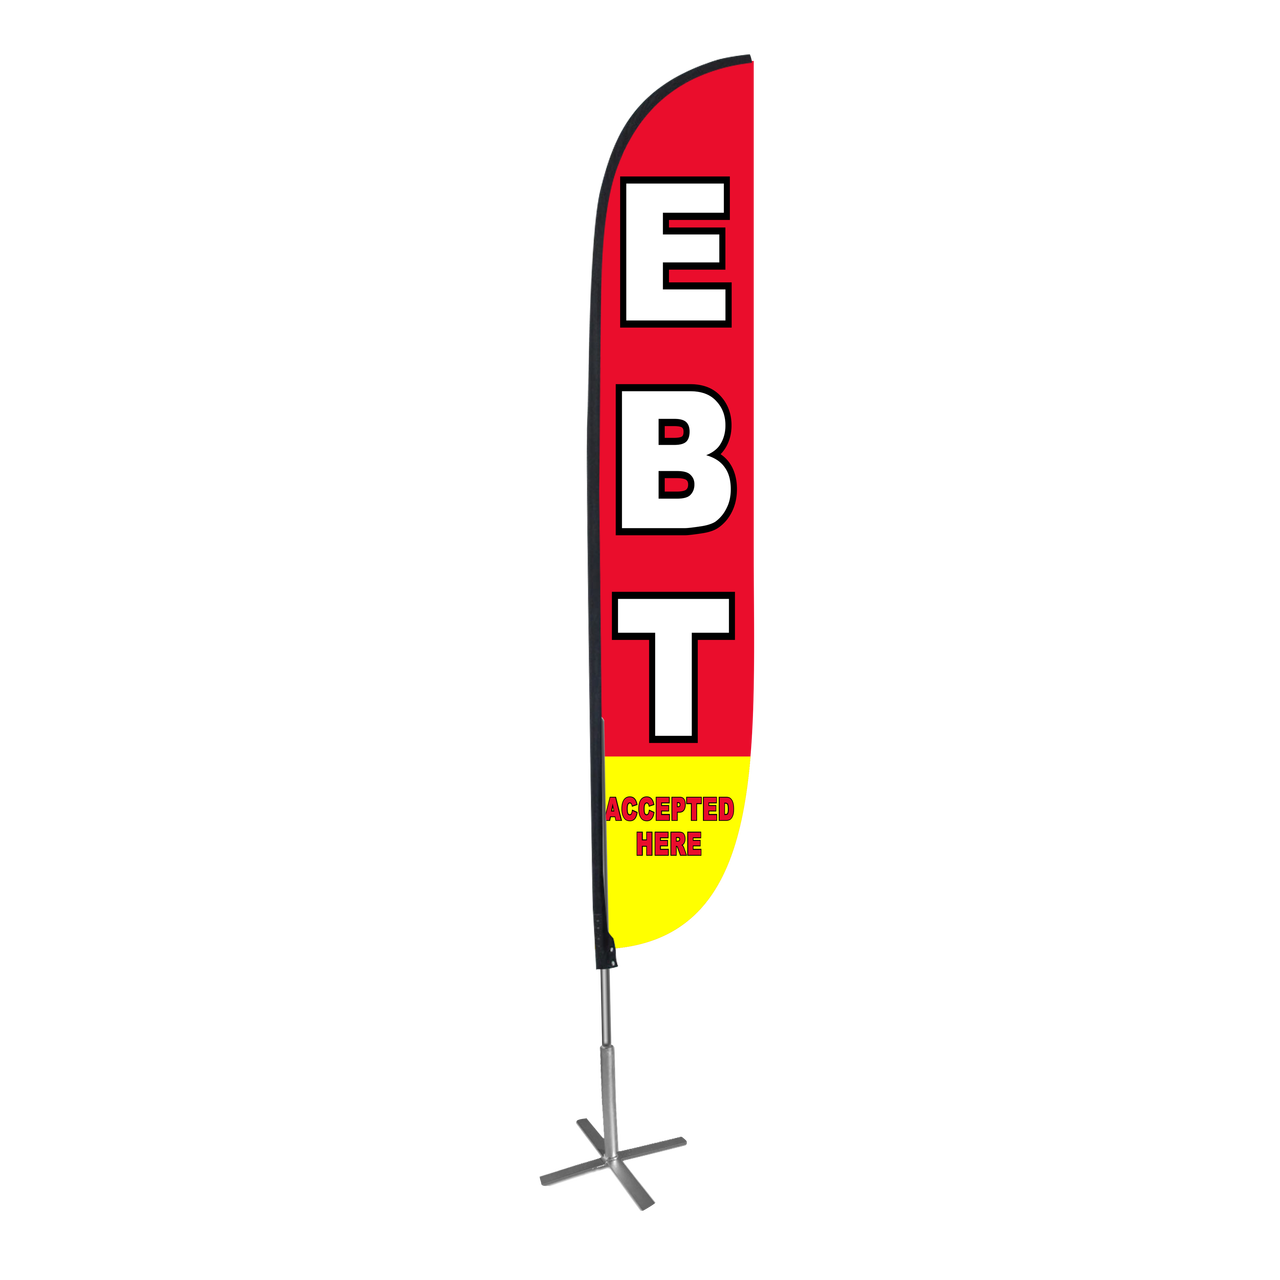 12ft EBT Accepted Here Feather Flag